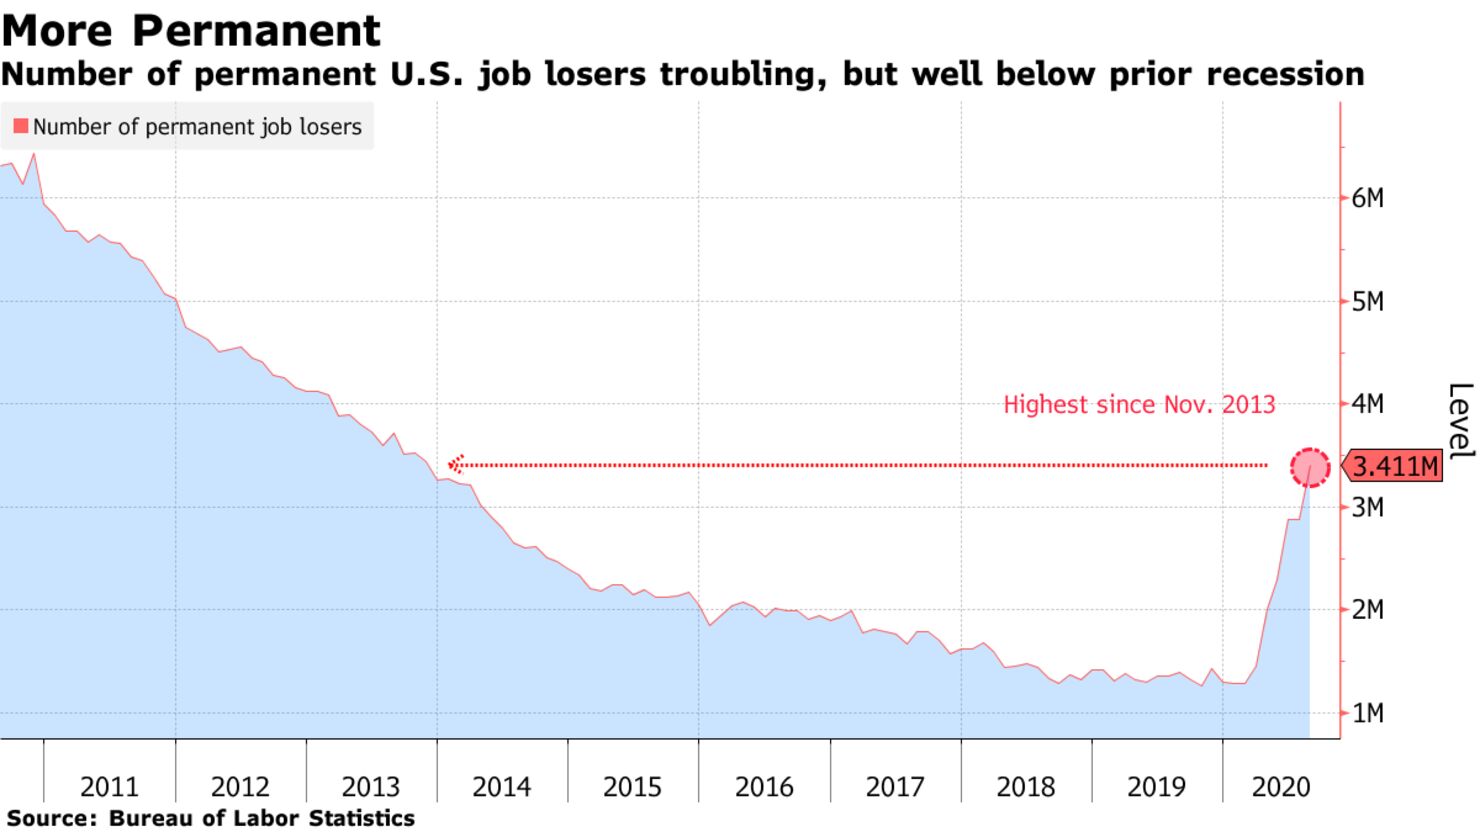 Number of permanent U.S. job losers troubling, but well below prior recession